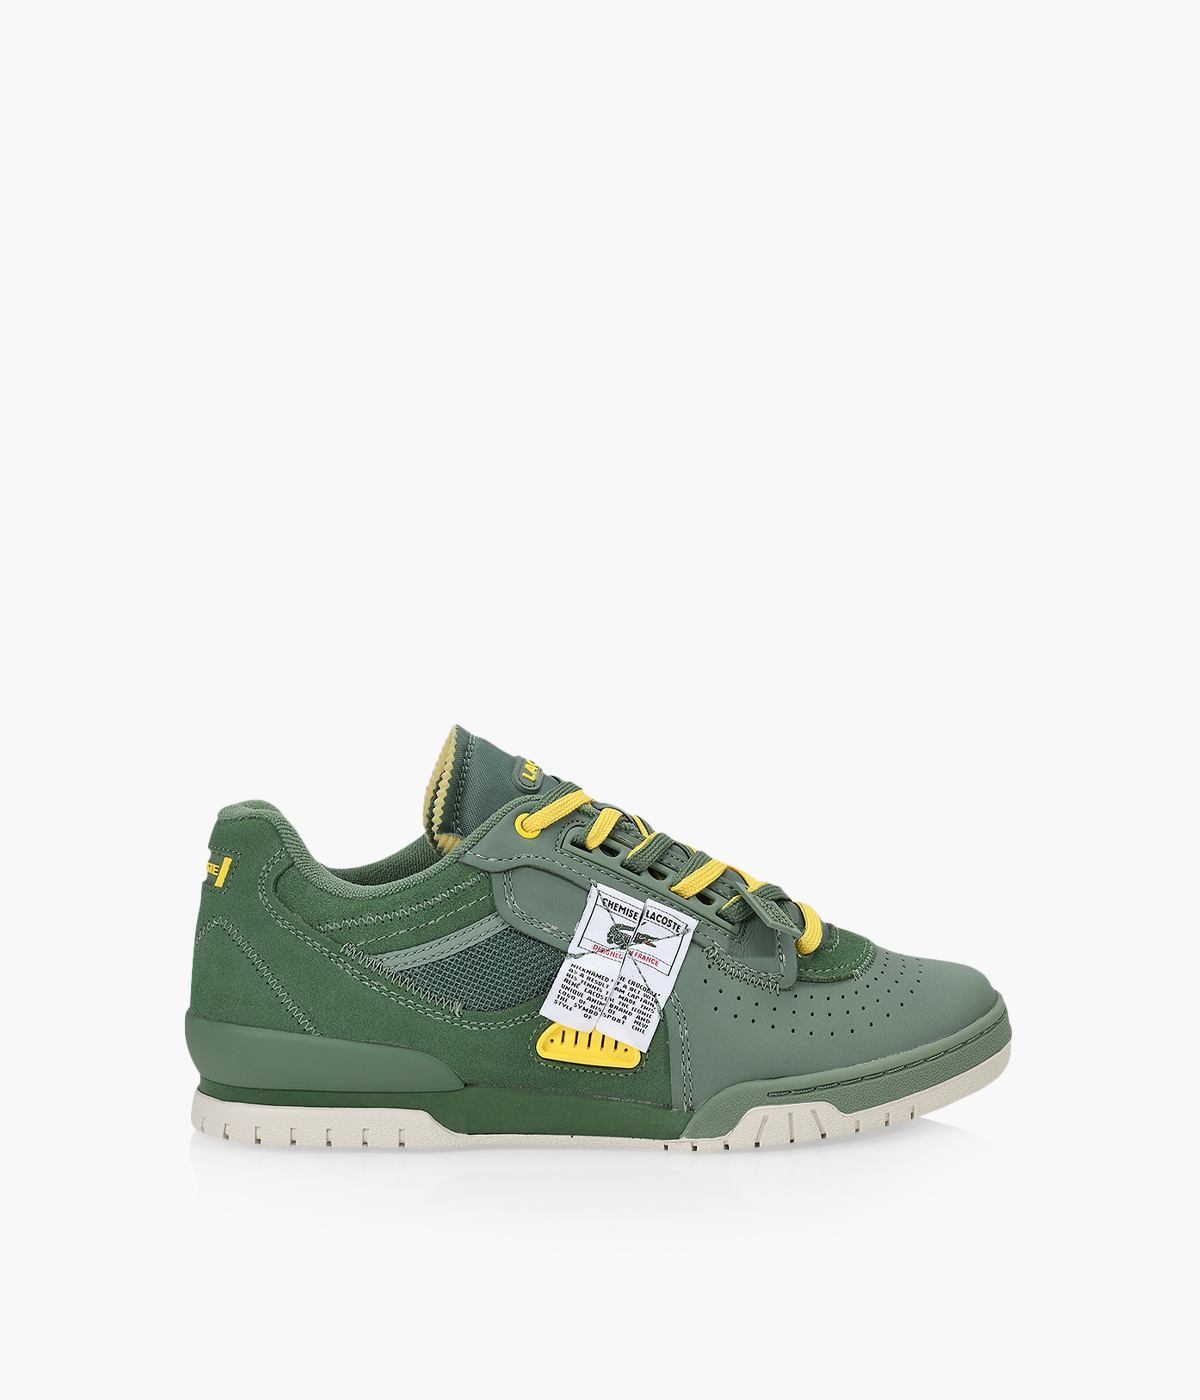 LACOSTE M89 - Green Leather | Browns Shoes